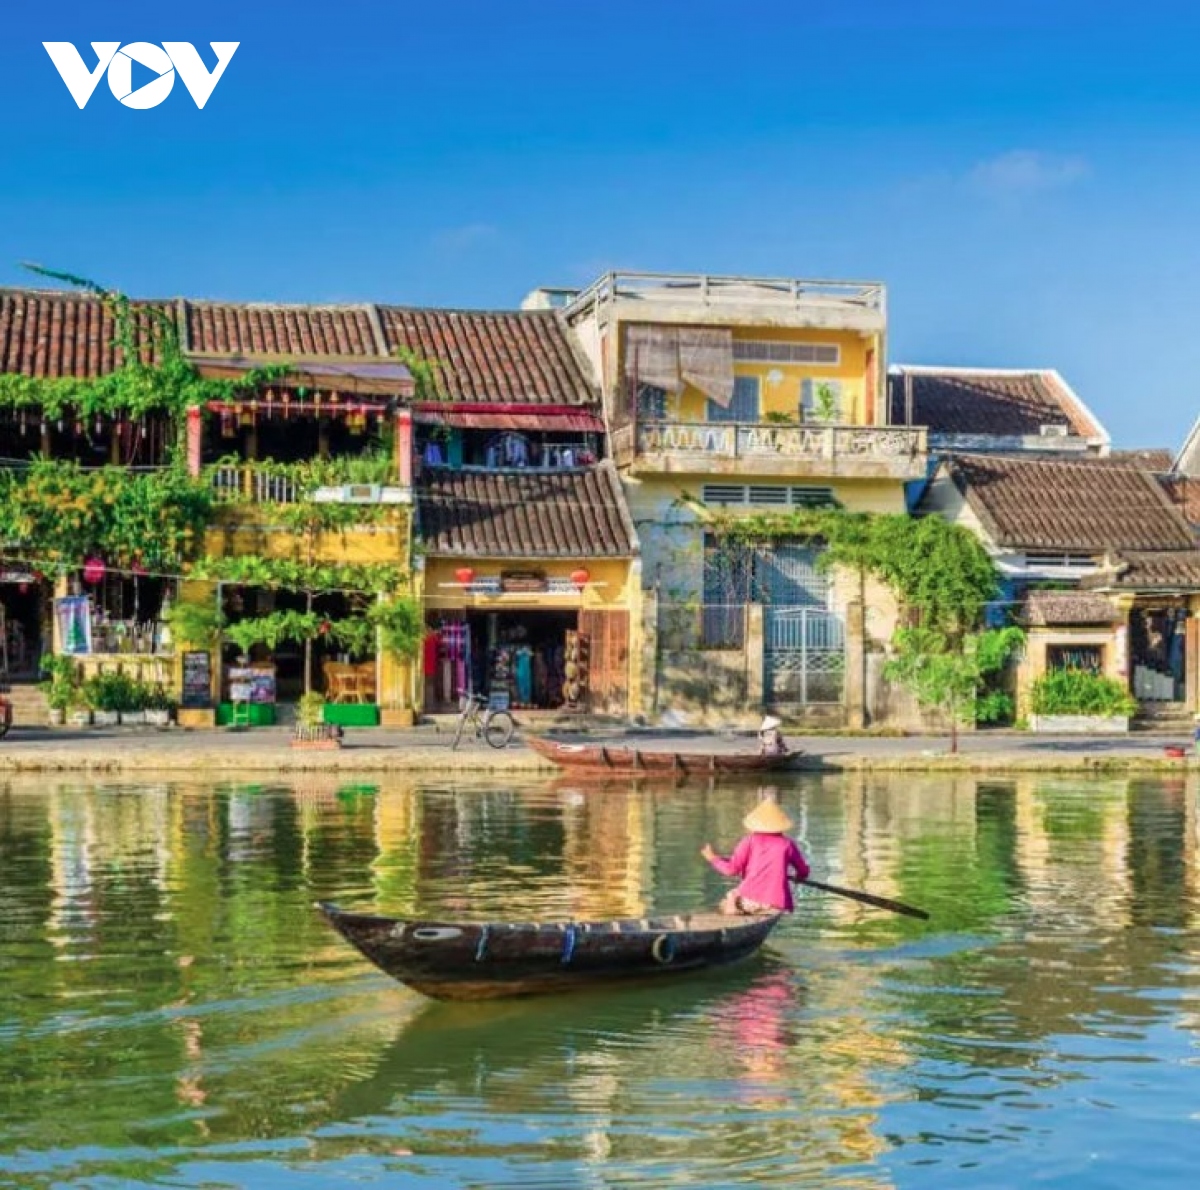 Vietnam among top six Asian destinations for New Year